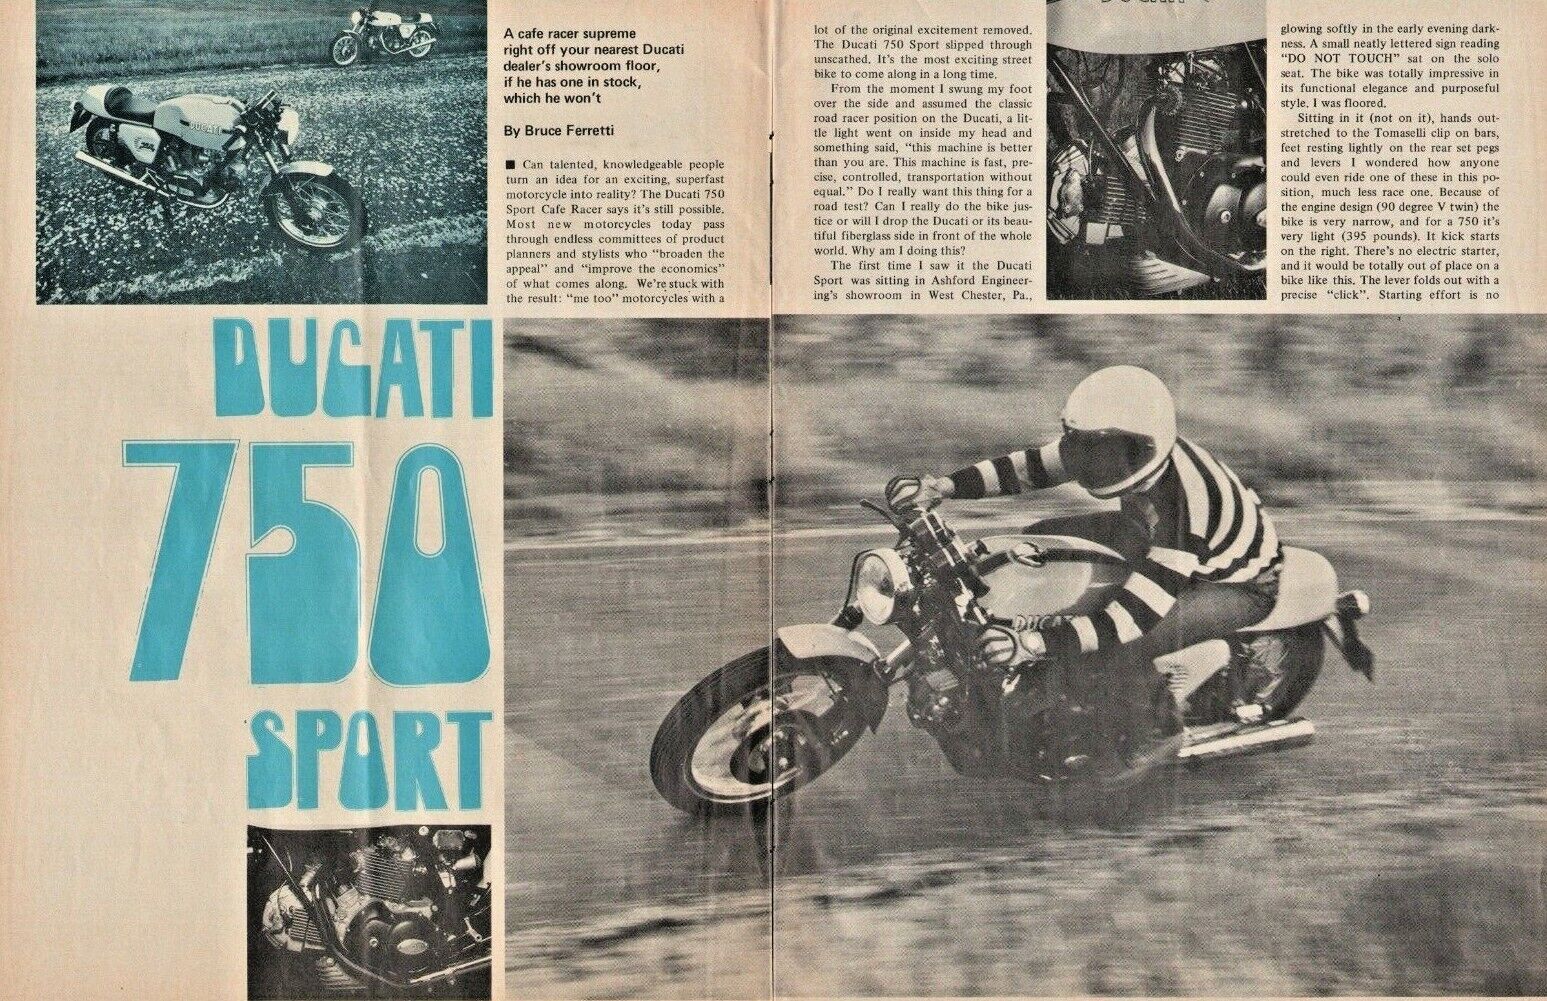 1974 Ducati 750 Sport - 6-Page Vintage Motorcycle Road Test Article